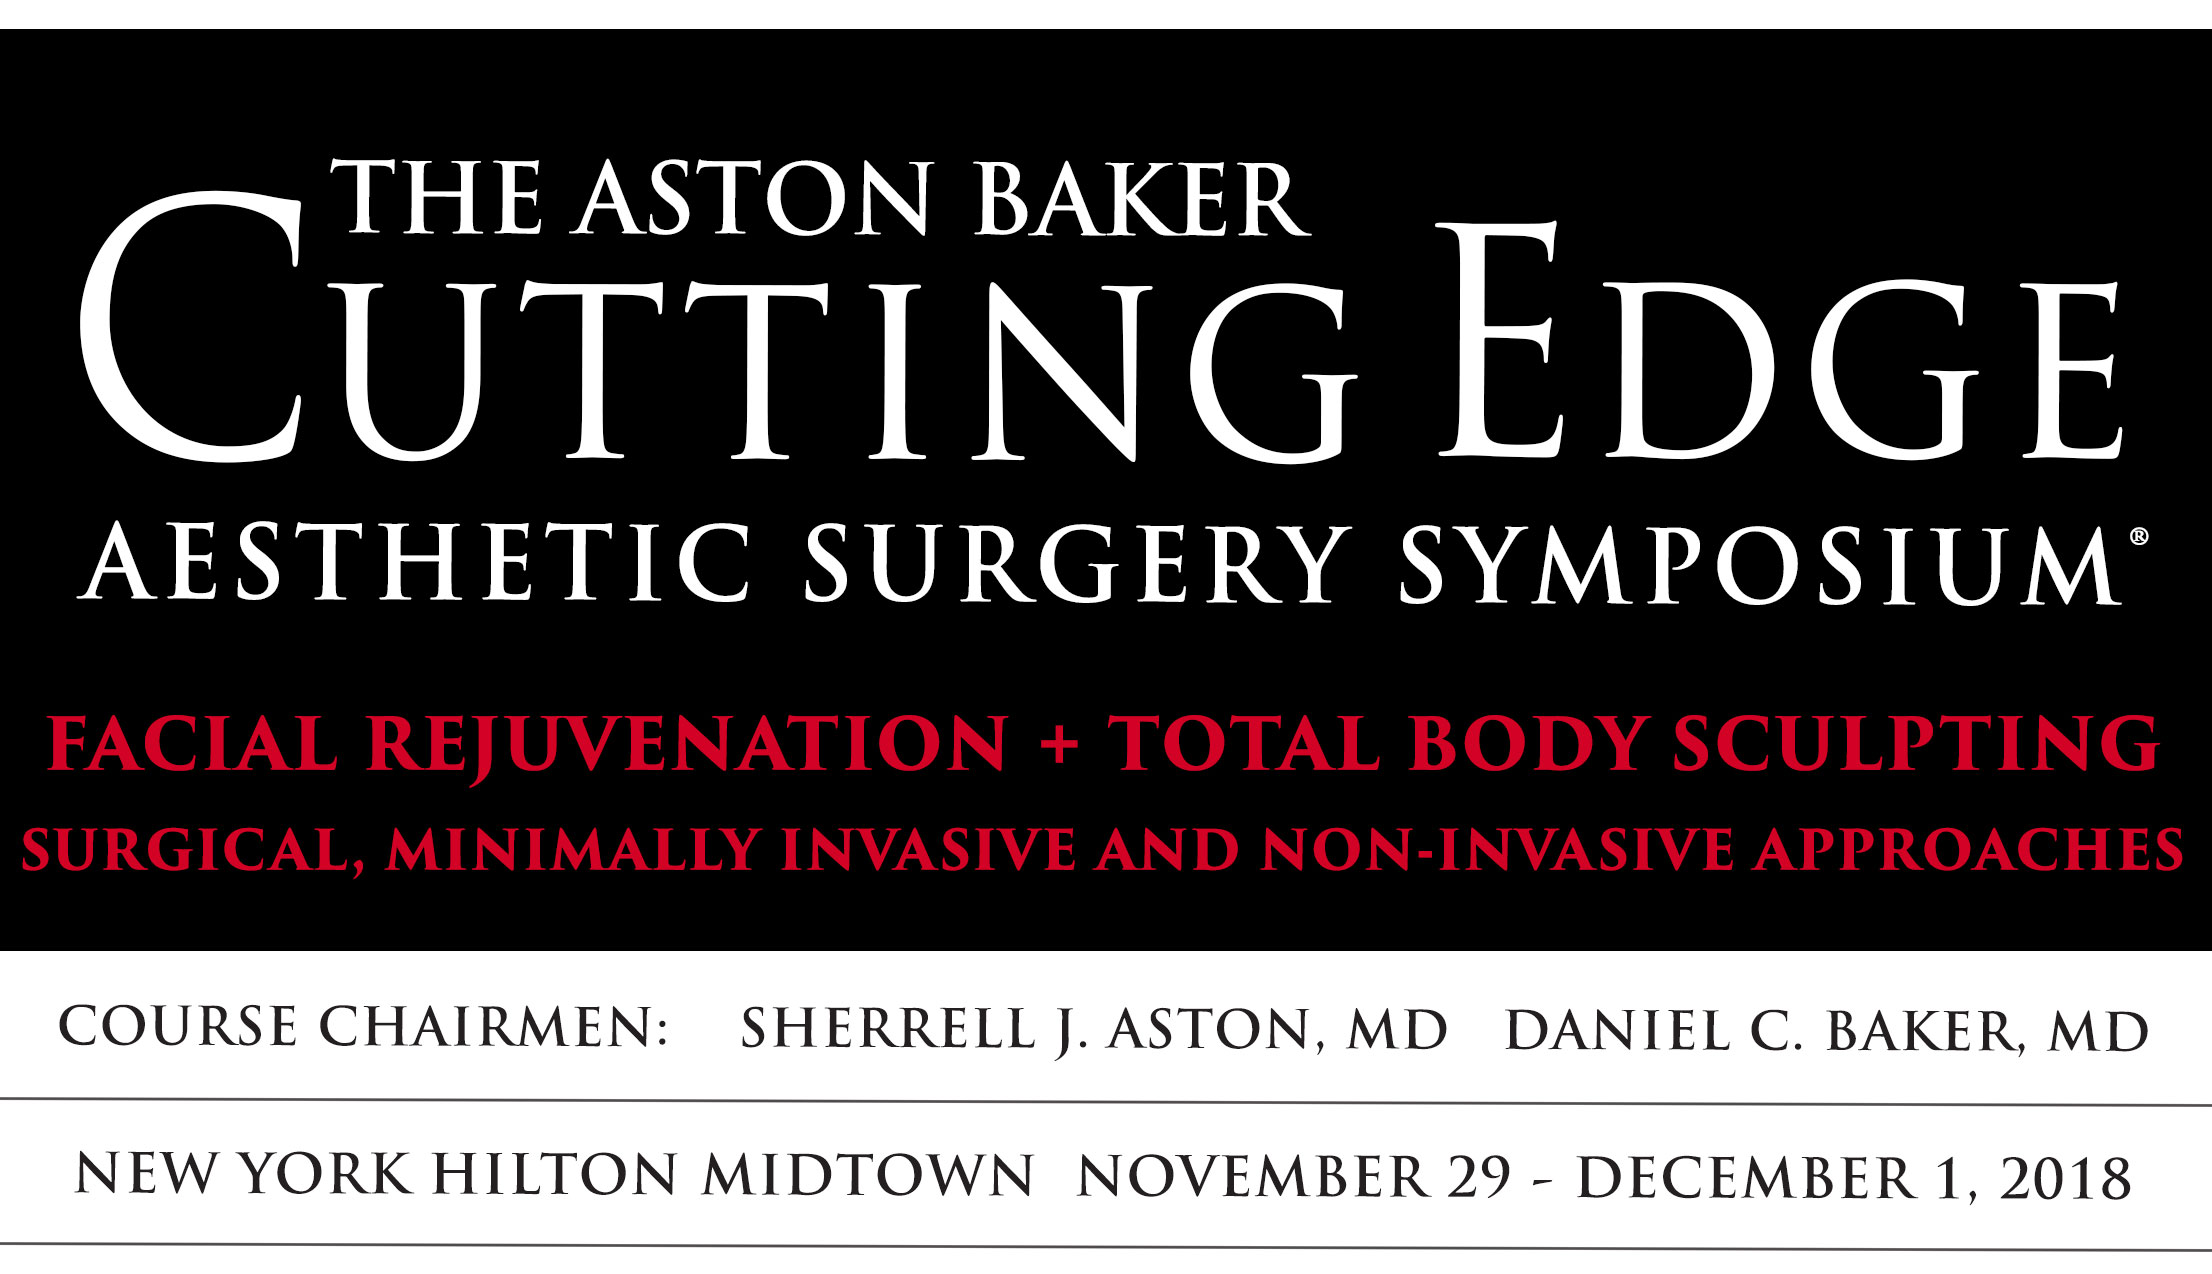 Dr Tsekouras participated in the 38th Aesthetic Surgery Symposium, the Aston Baker Cutting Edge 2018, held at The Waldorf Astoria Hotel in Νew York.